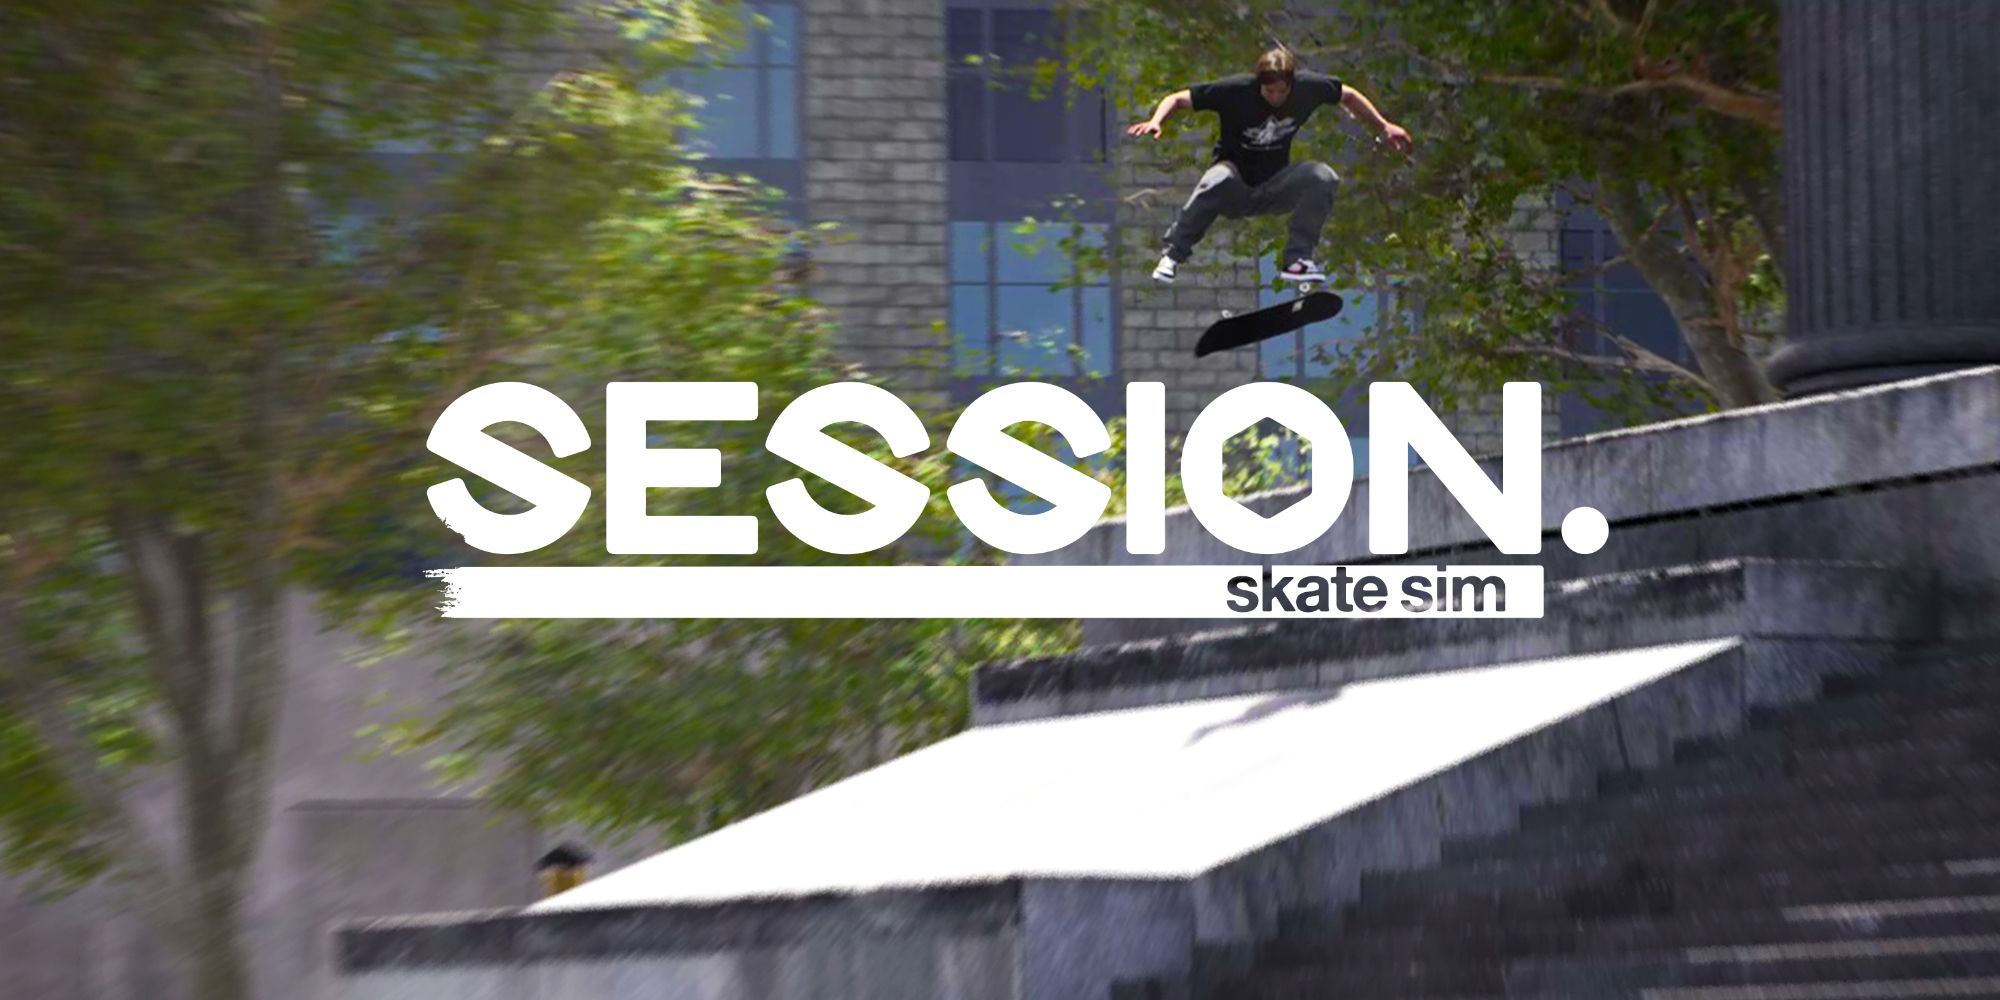 Session Skate Sim Review skater jumping over title and down stairs